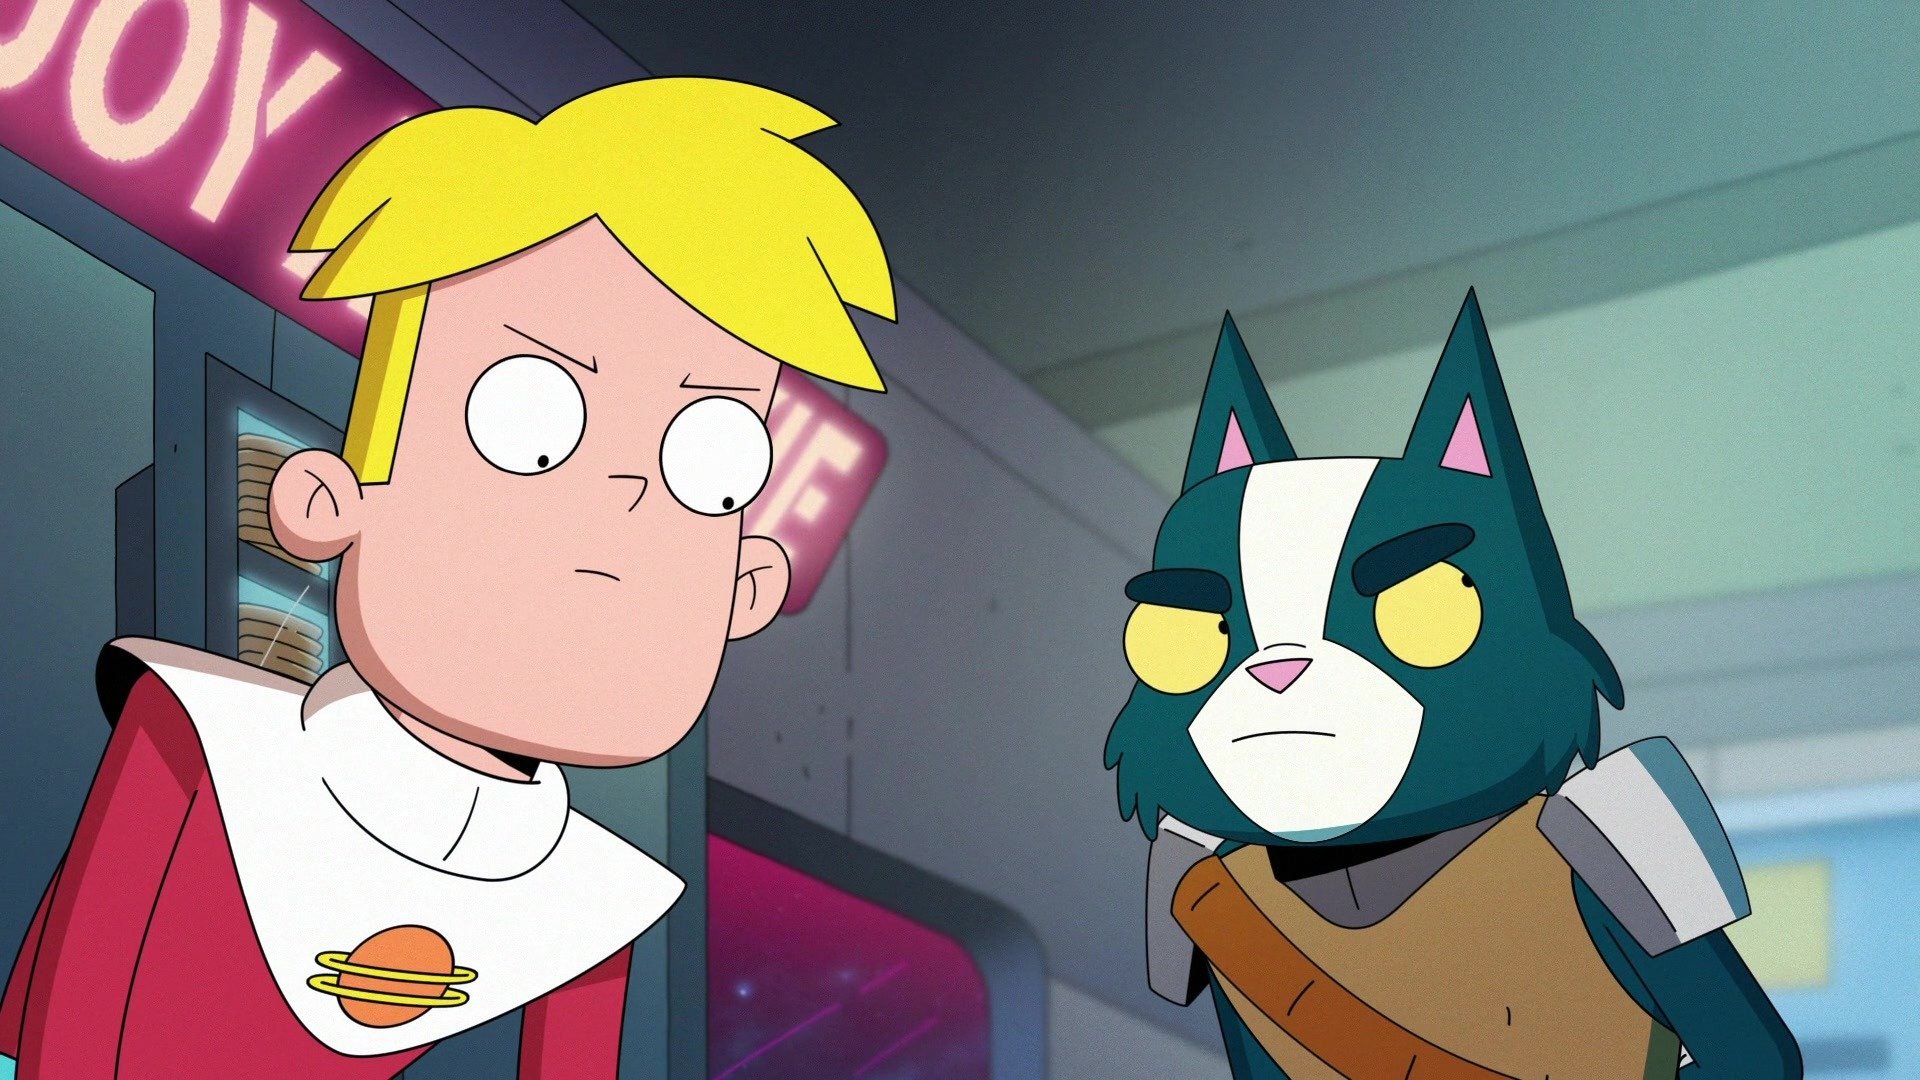 Download Blonde Avocato Final Space Gary Goodspeed Tv Show Final Space Hd Wallpaper